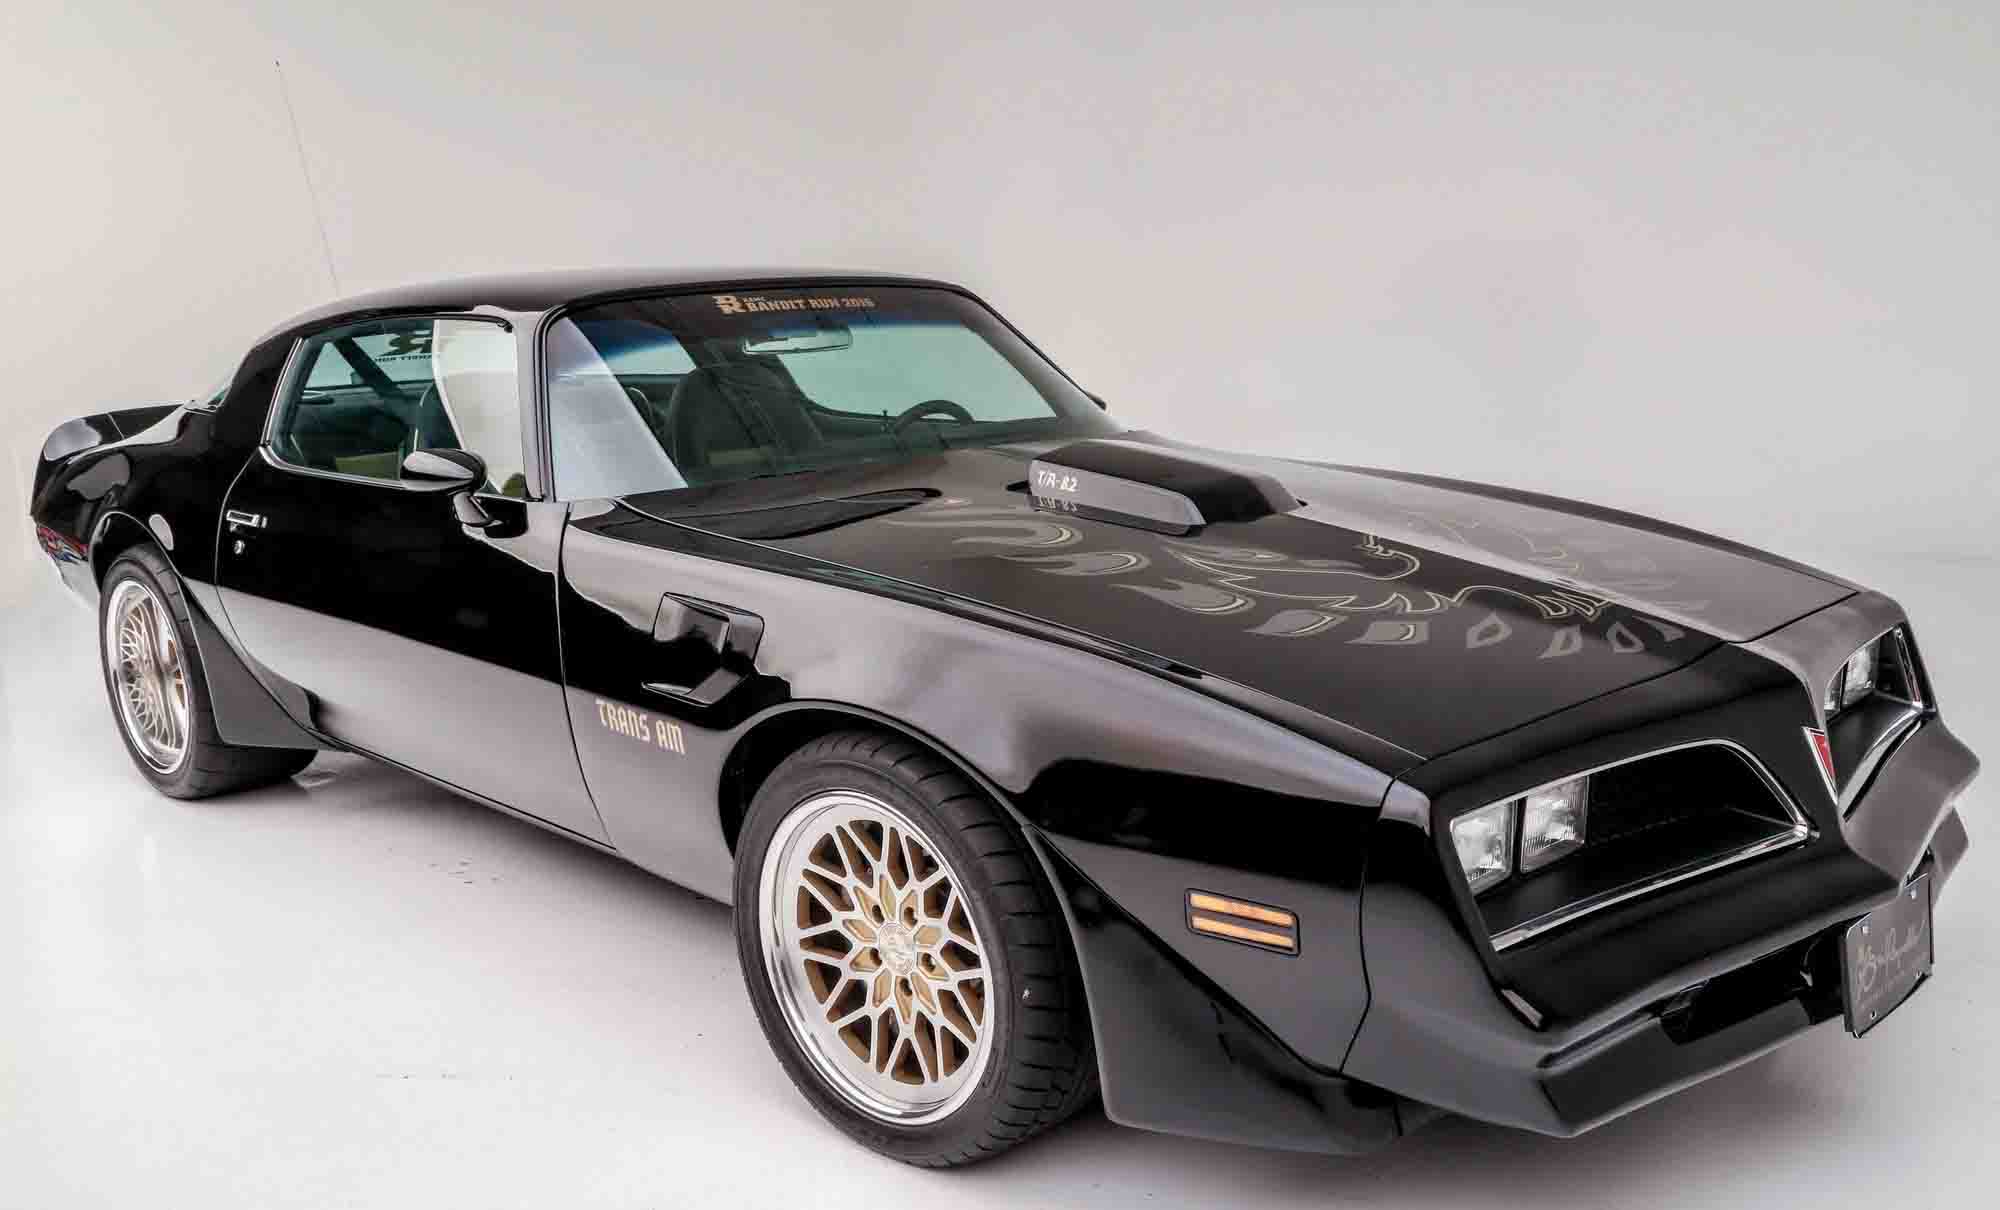 A picture of the "The Bandit" car from Smokey and The Bandit that was restored.